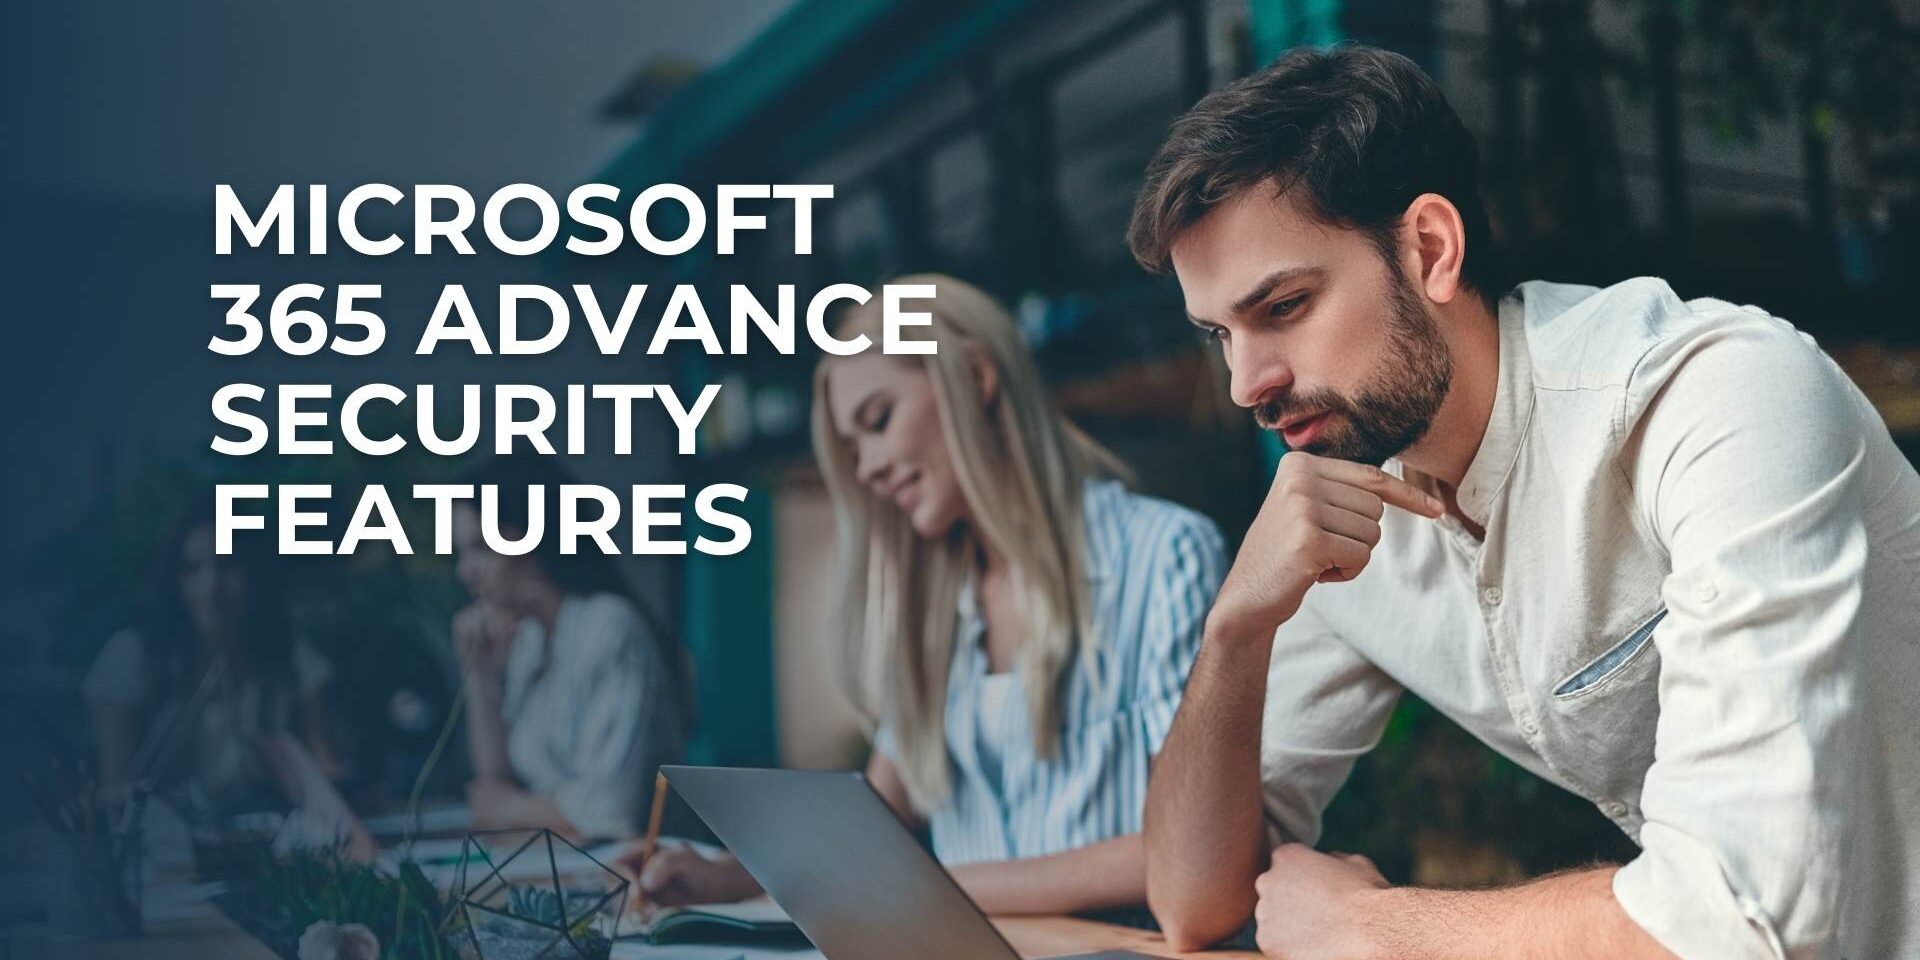 Microsoft 365 Advance Security Features